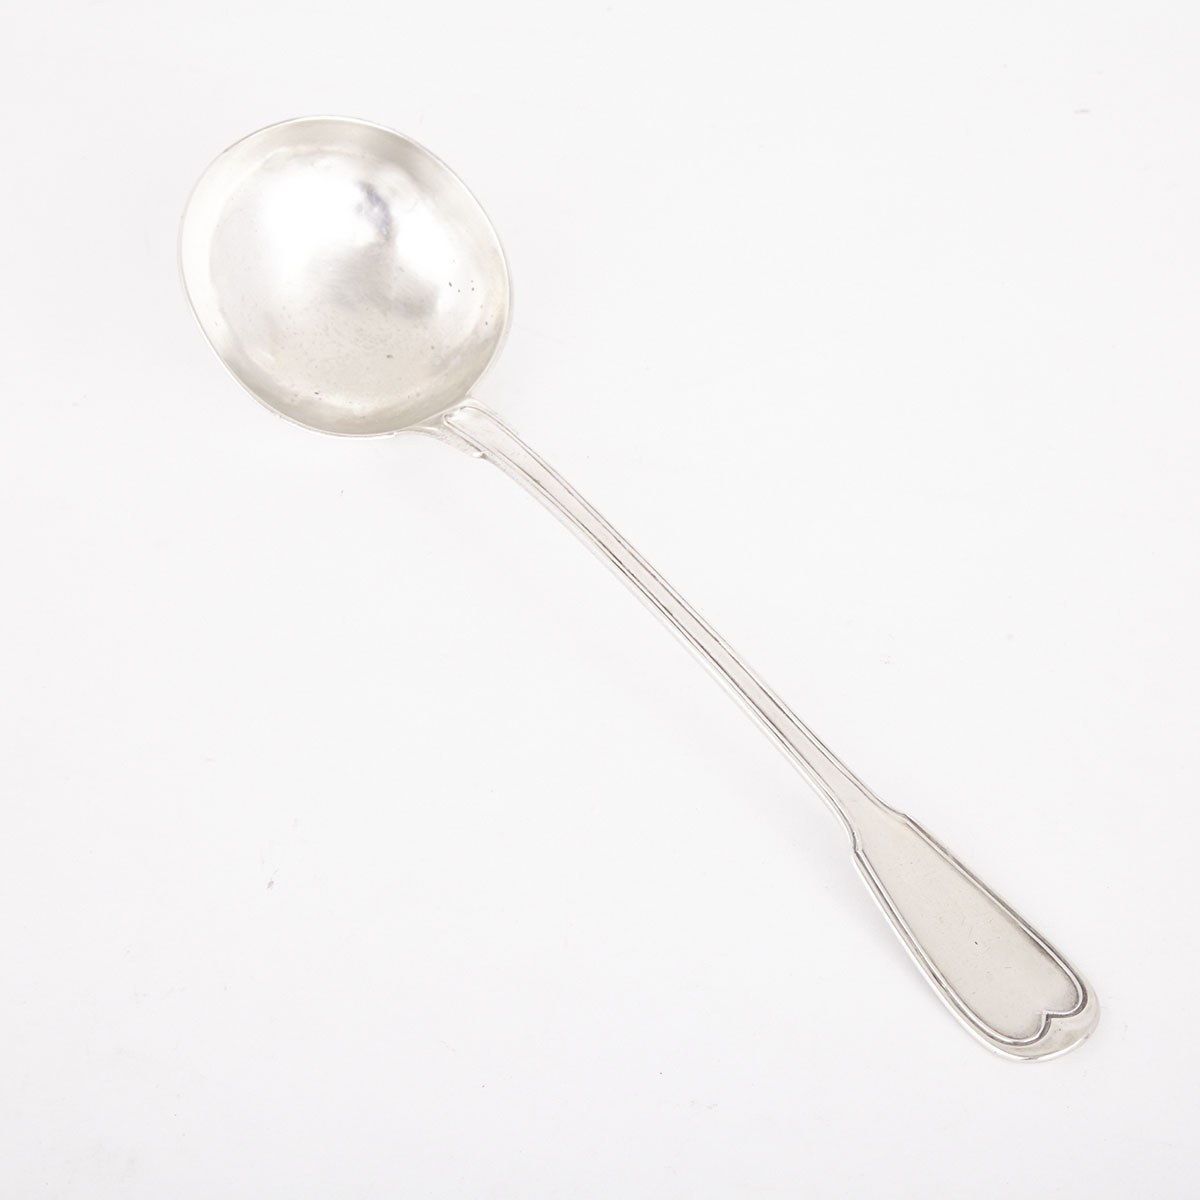 French Silver Fiddle and Thread Pattern Soup Ladle, Veyrier, Paris, mid-19th century